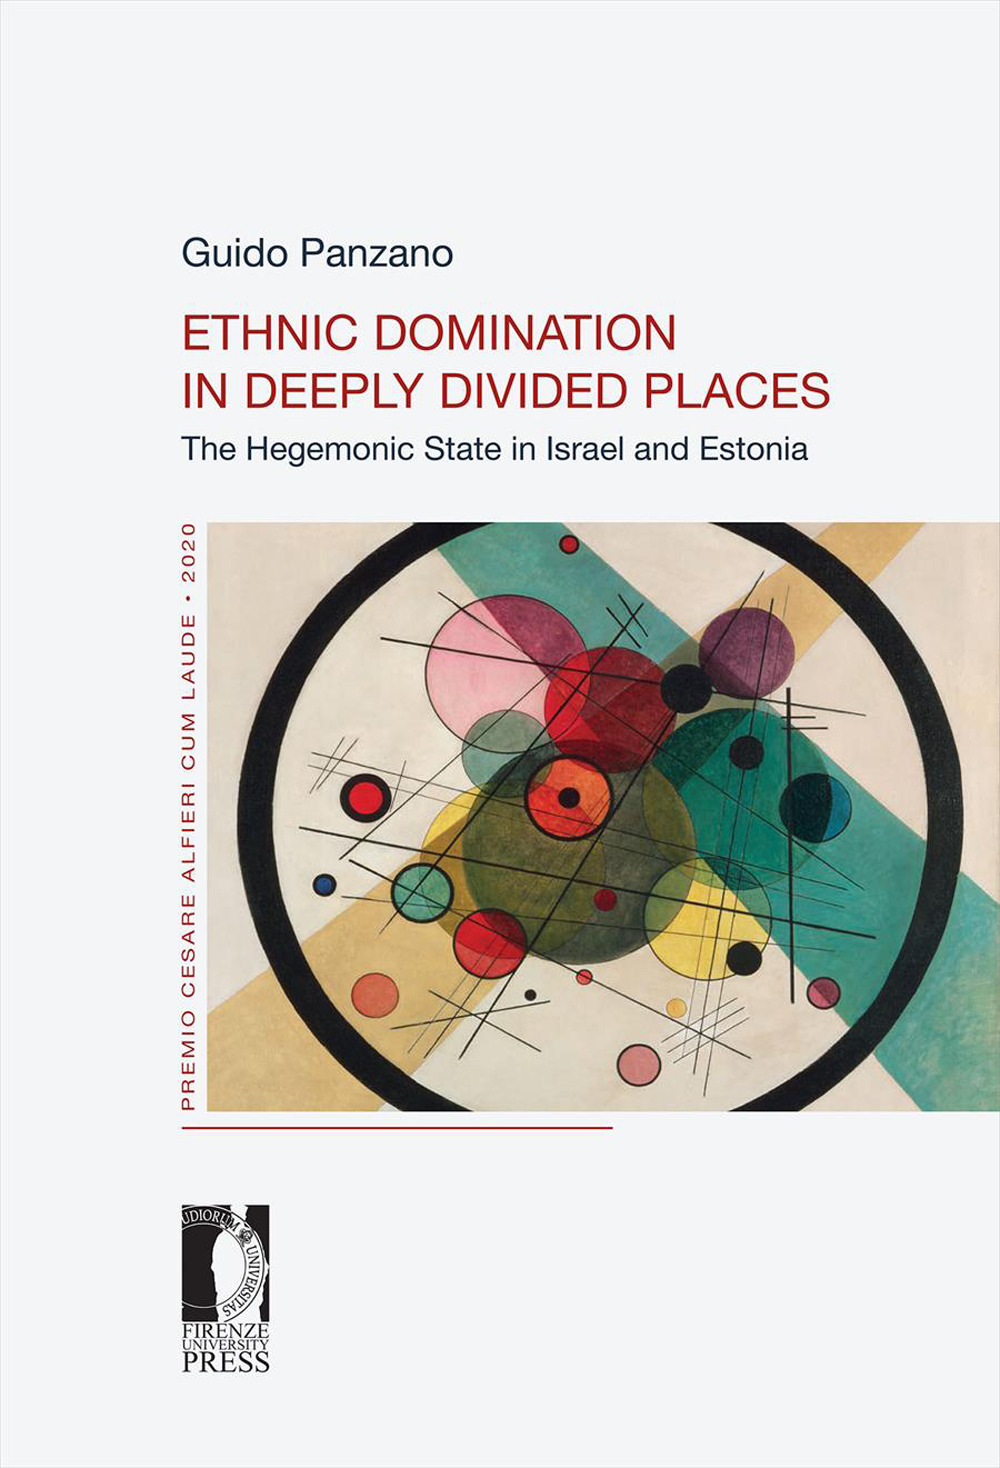 Ethnic domination in deeply divided places. The hegemonic state in Israel and Estonia